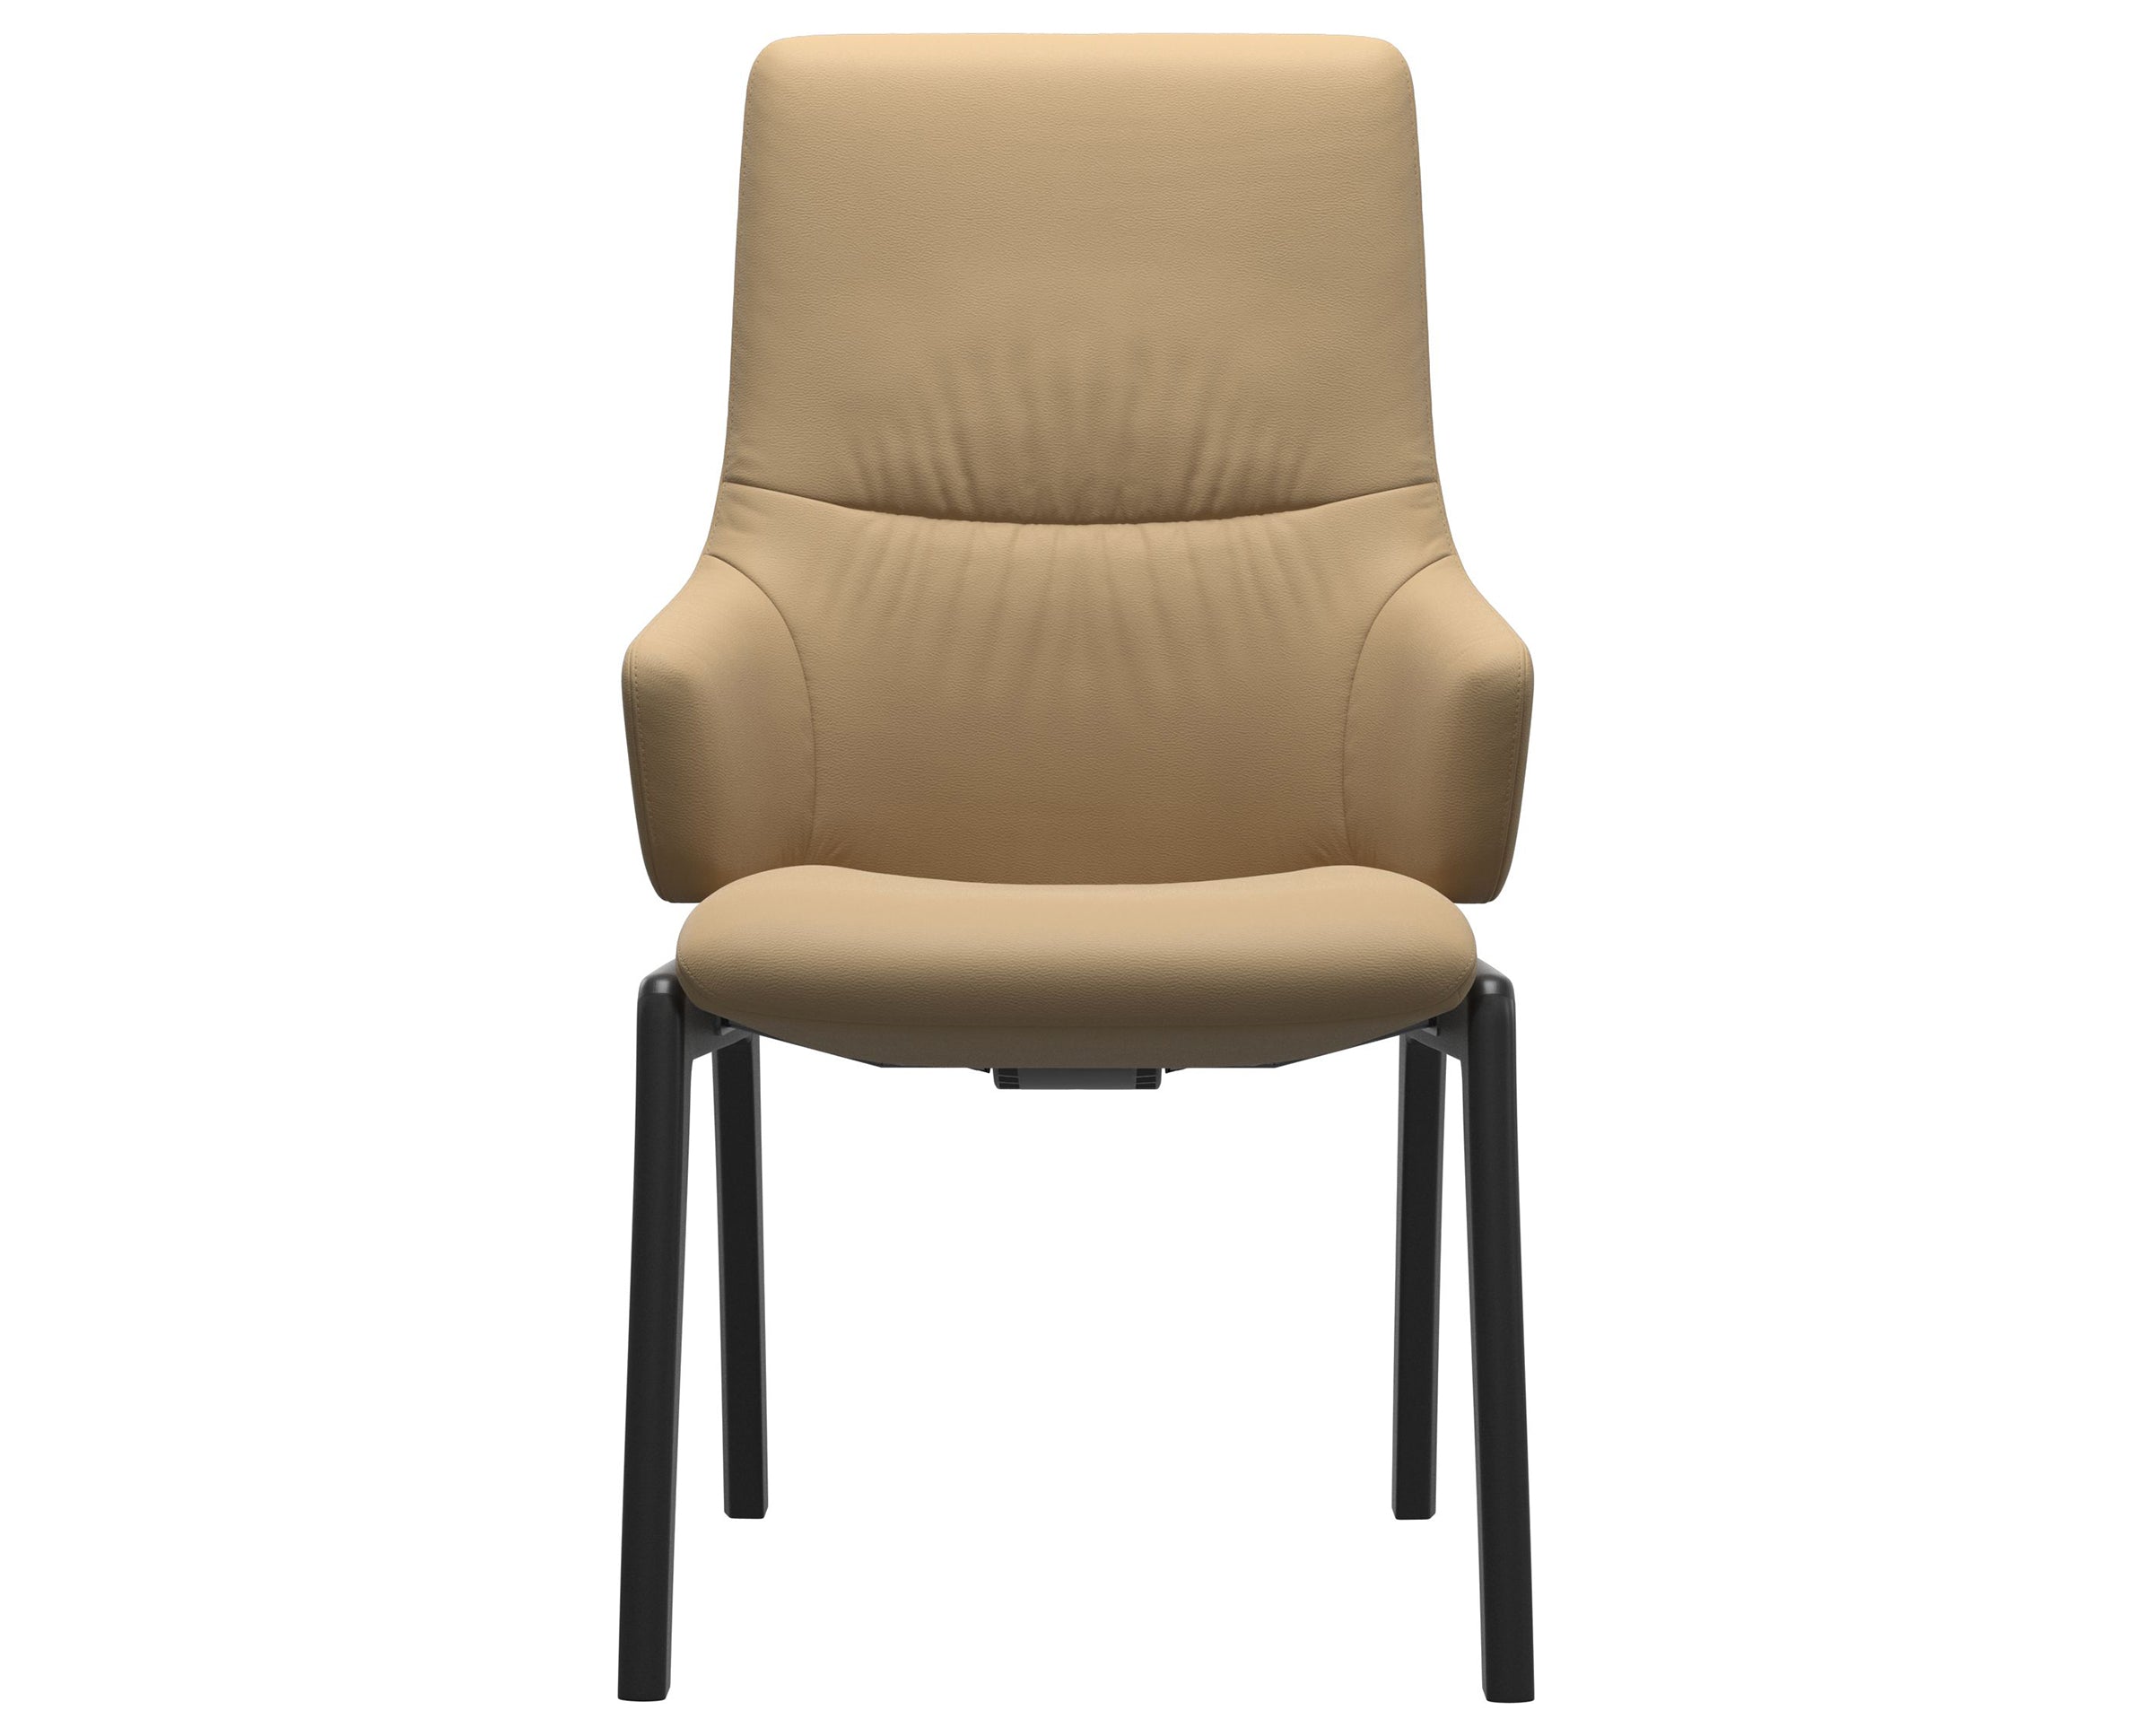 Paloma Leather Sand and Black Base | Stressless Mint High Back D100 Dining Chair w/Arms | Valley Ridge Furniture